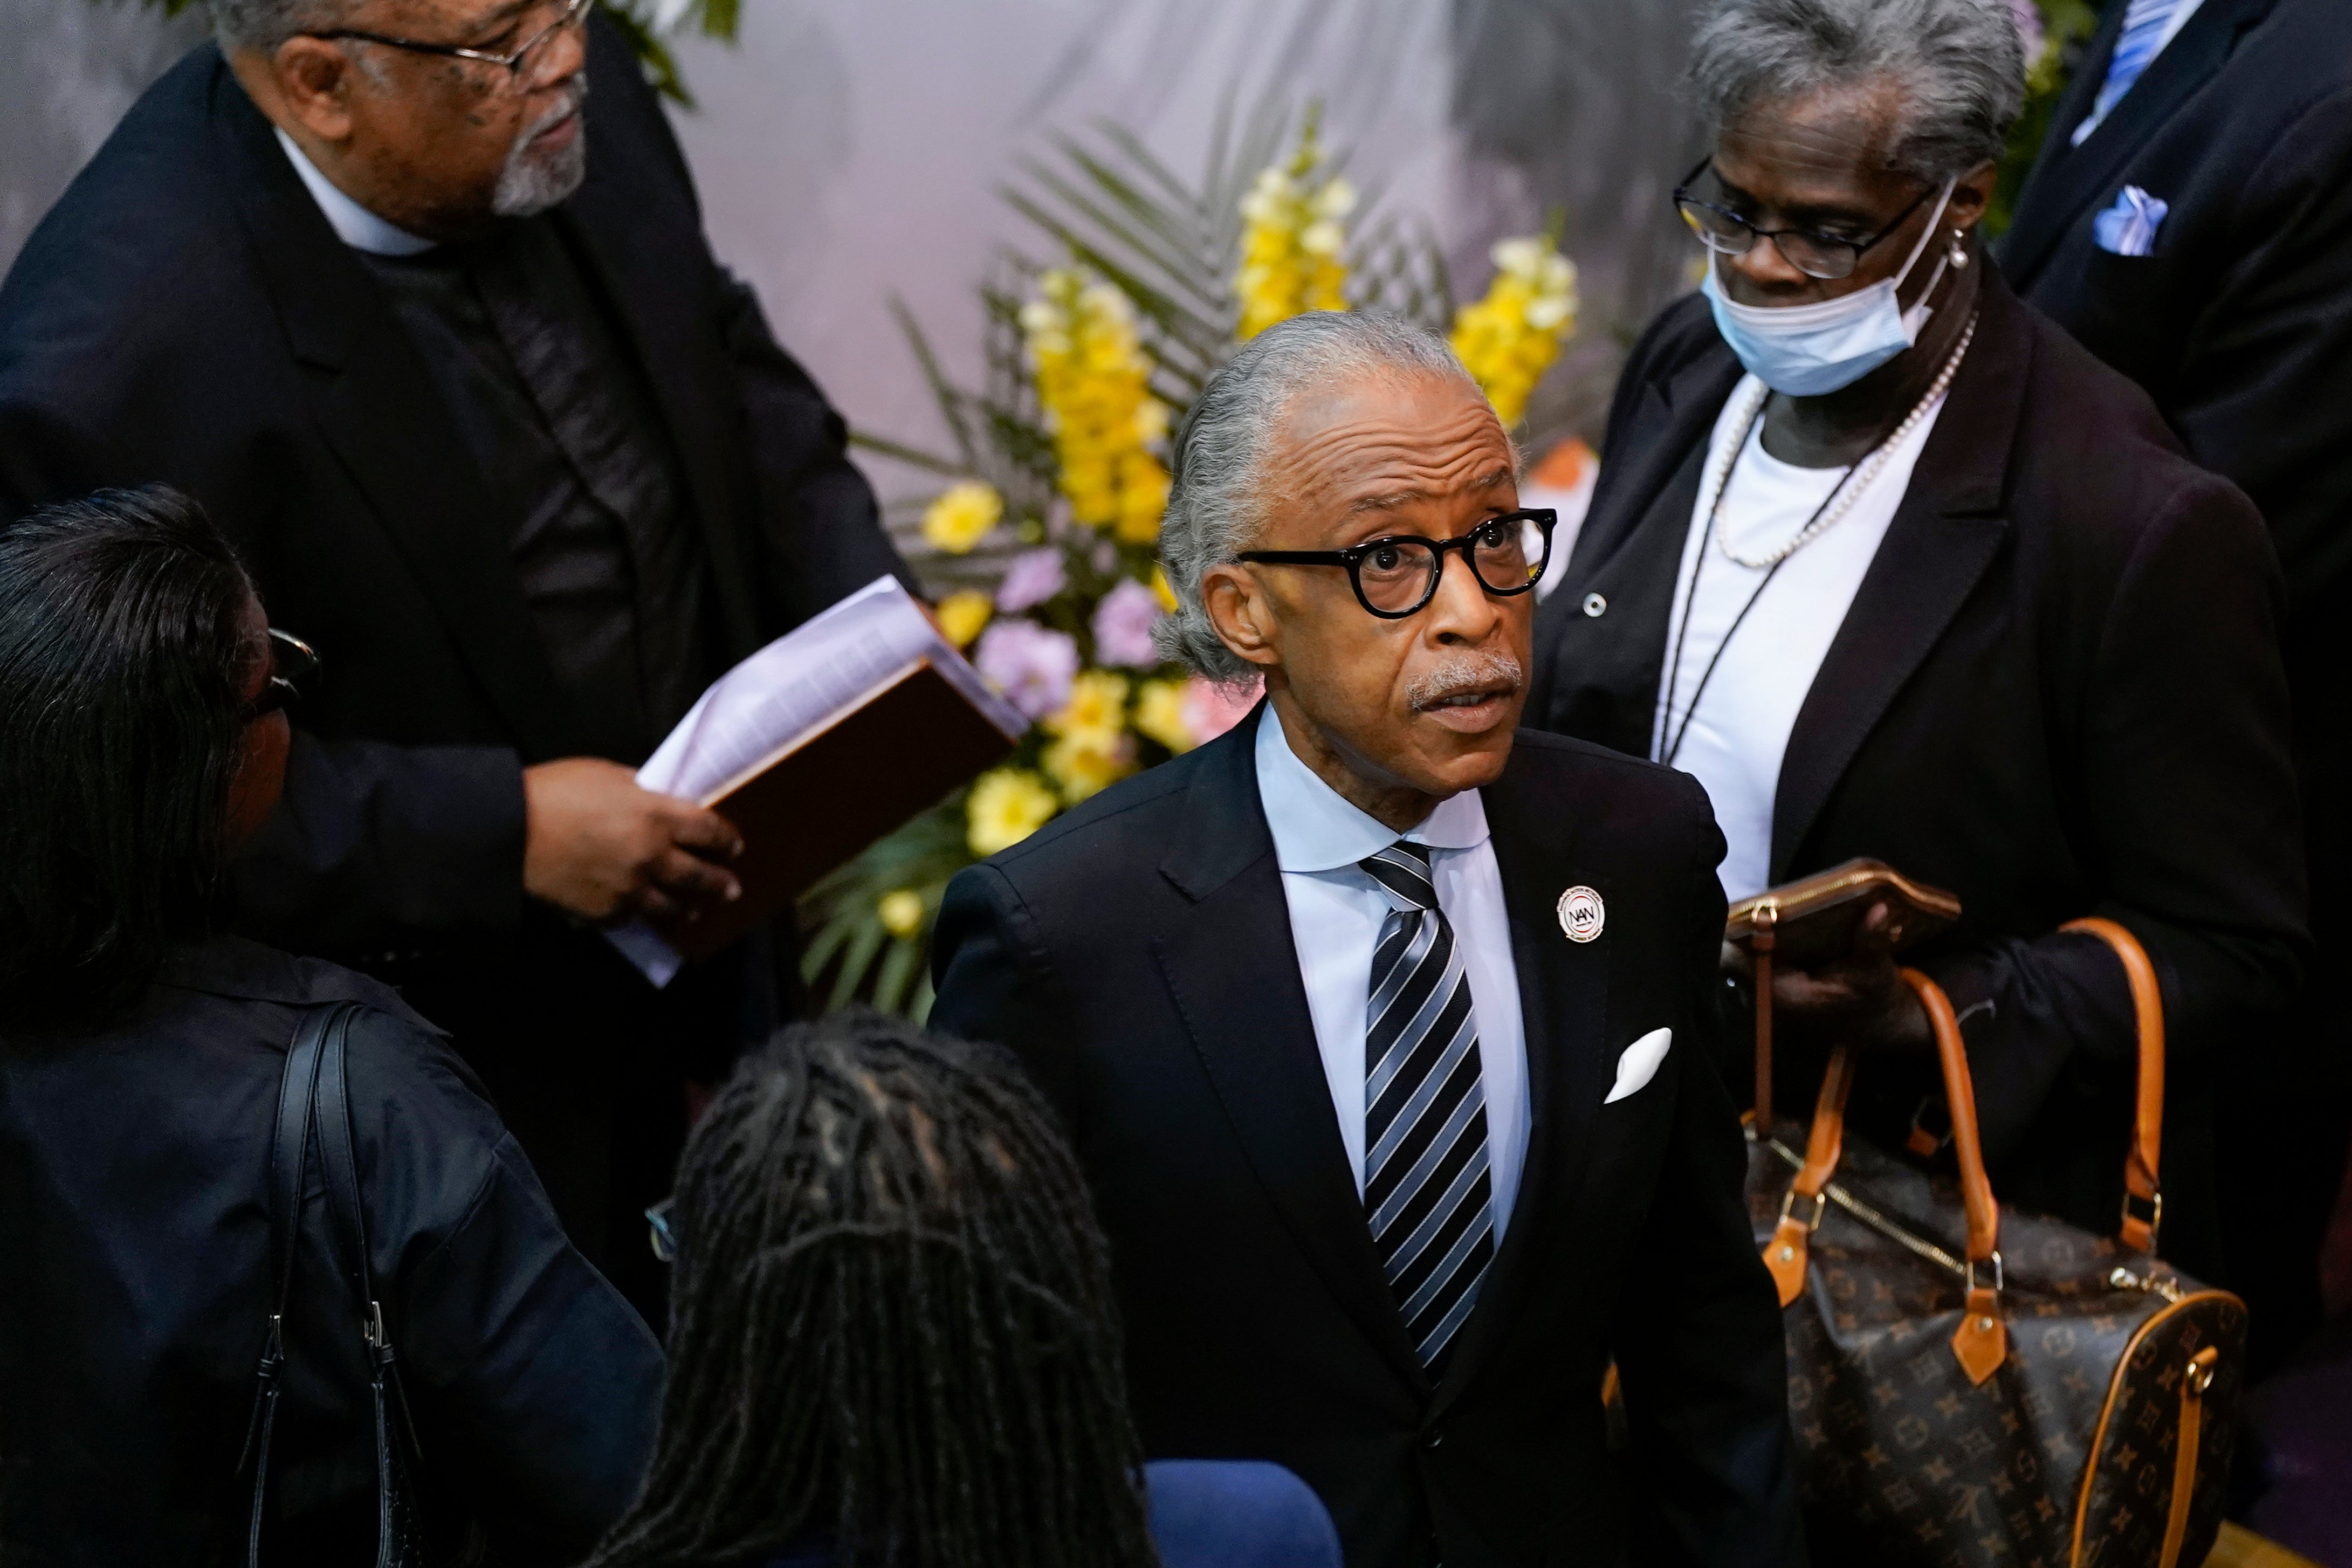 Rev Sharpton at a memorial service for Ruth Whitfield who was killed in the Buffalo massacre in May